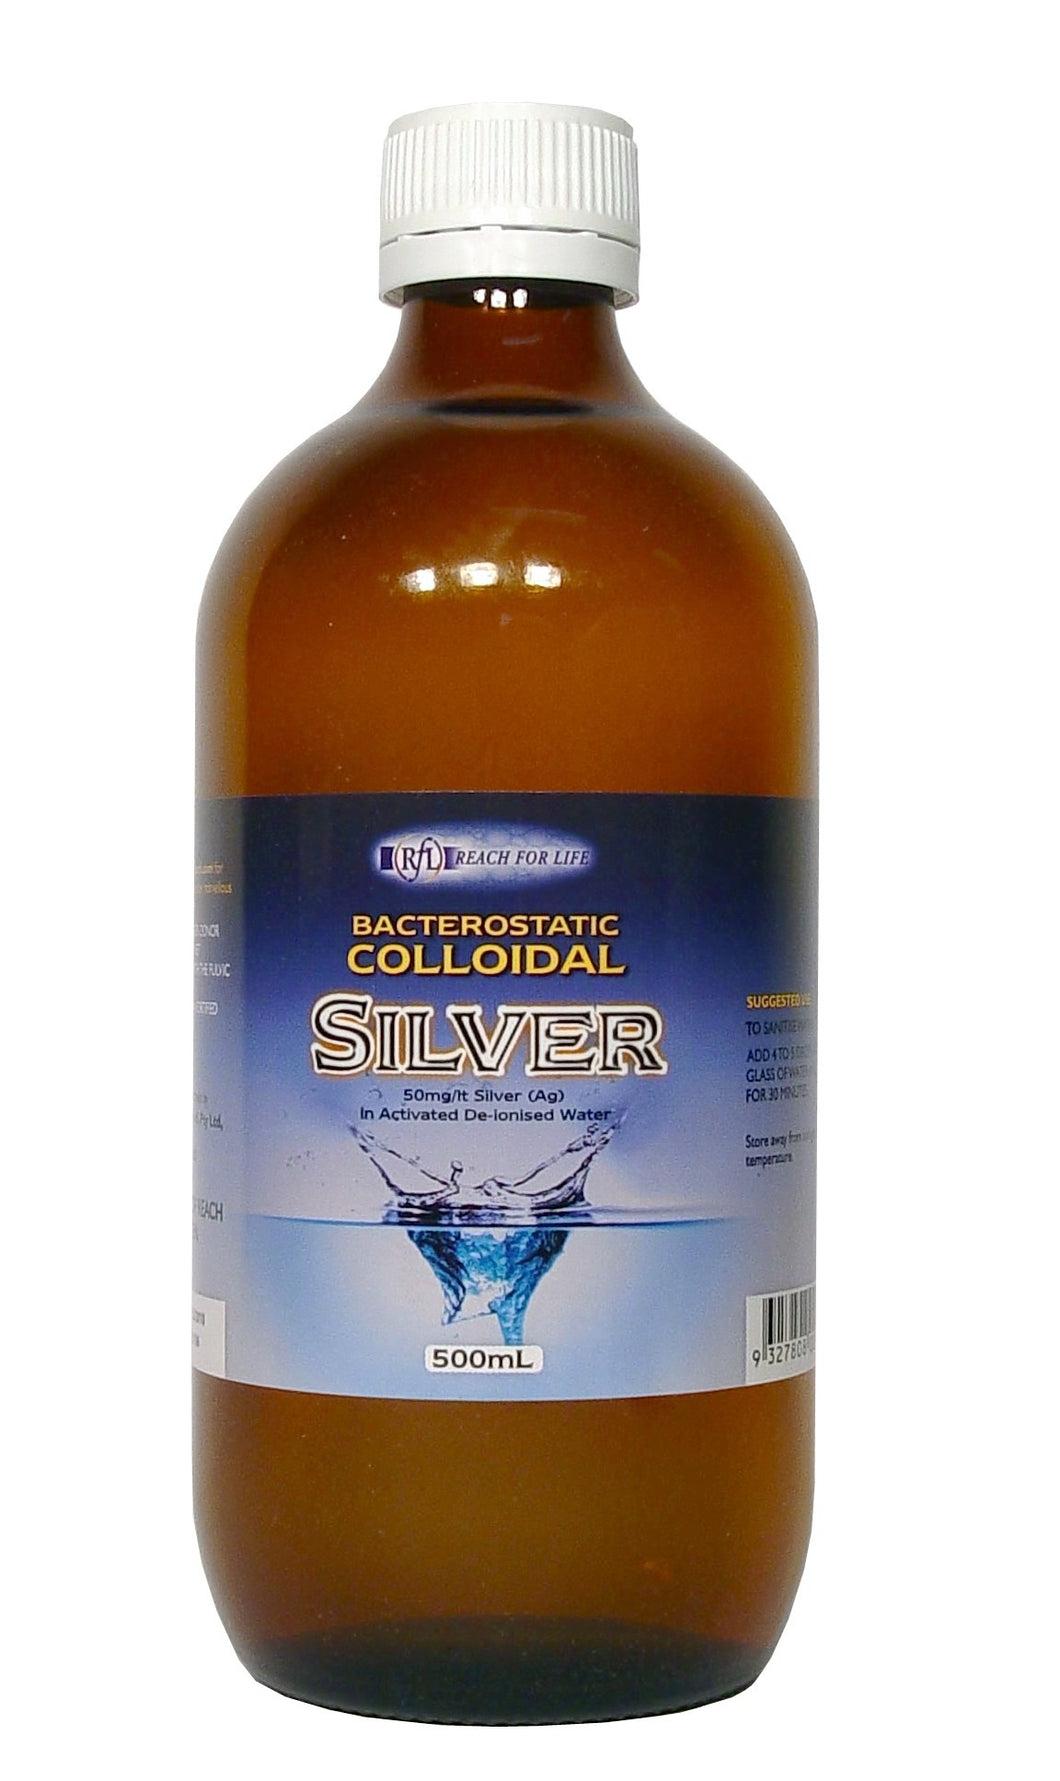 Reach For Life, Bacterostatic Colloidal Silver, 50 mg/Litre, 500 ml